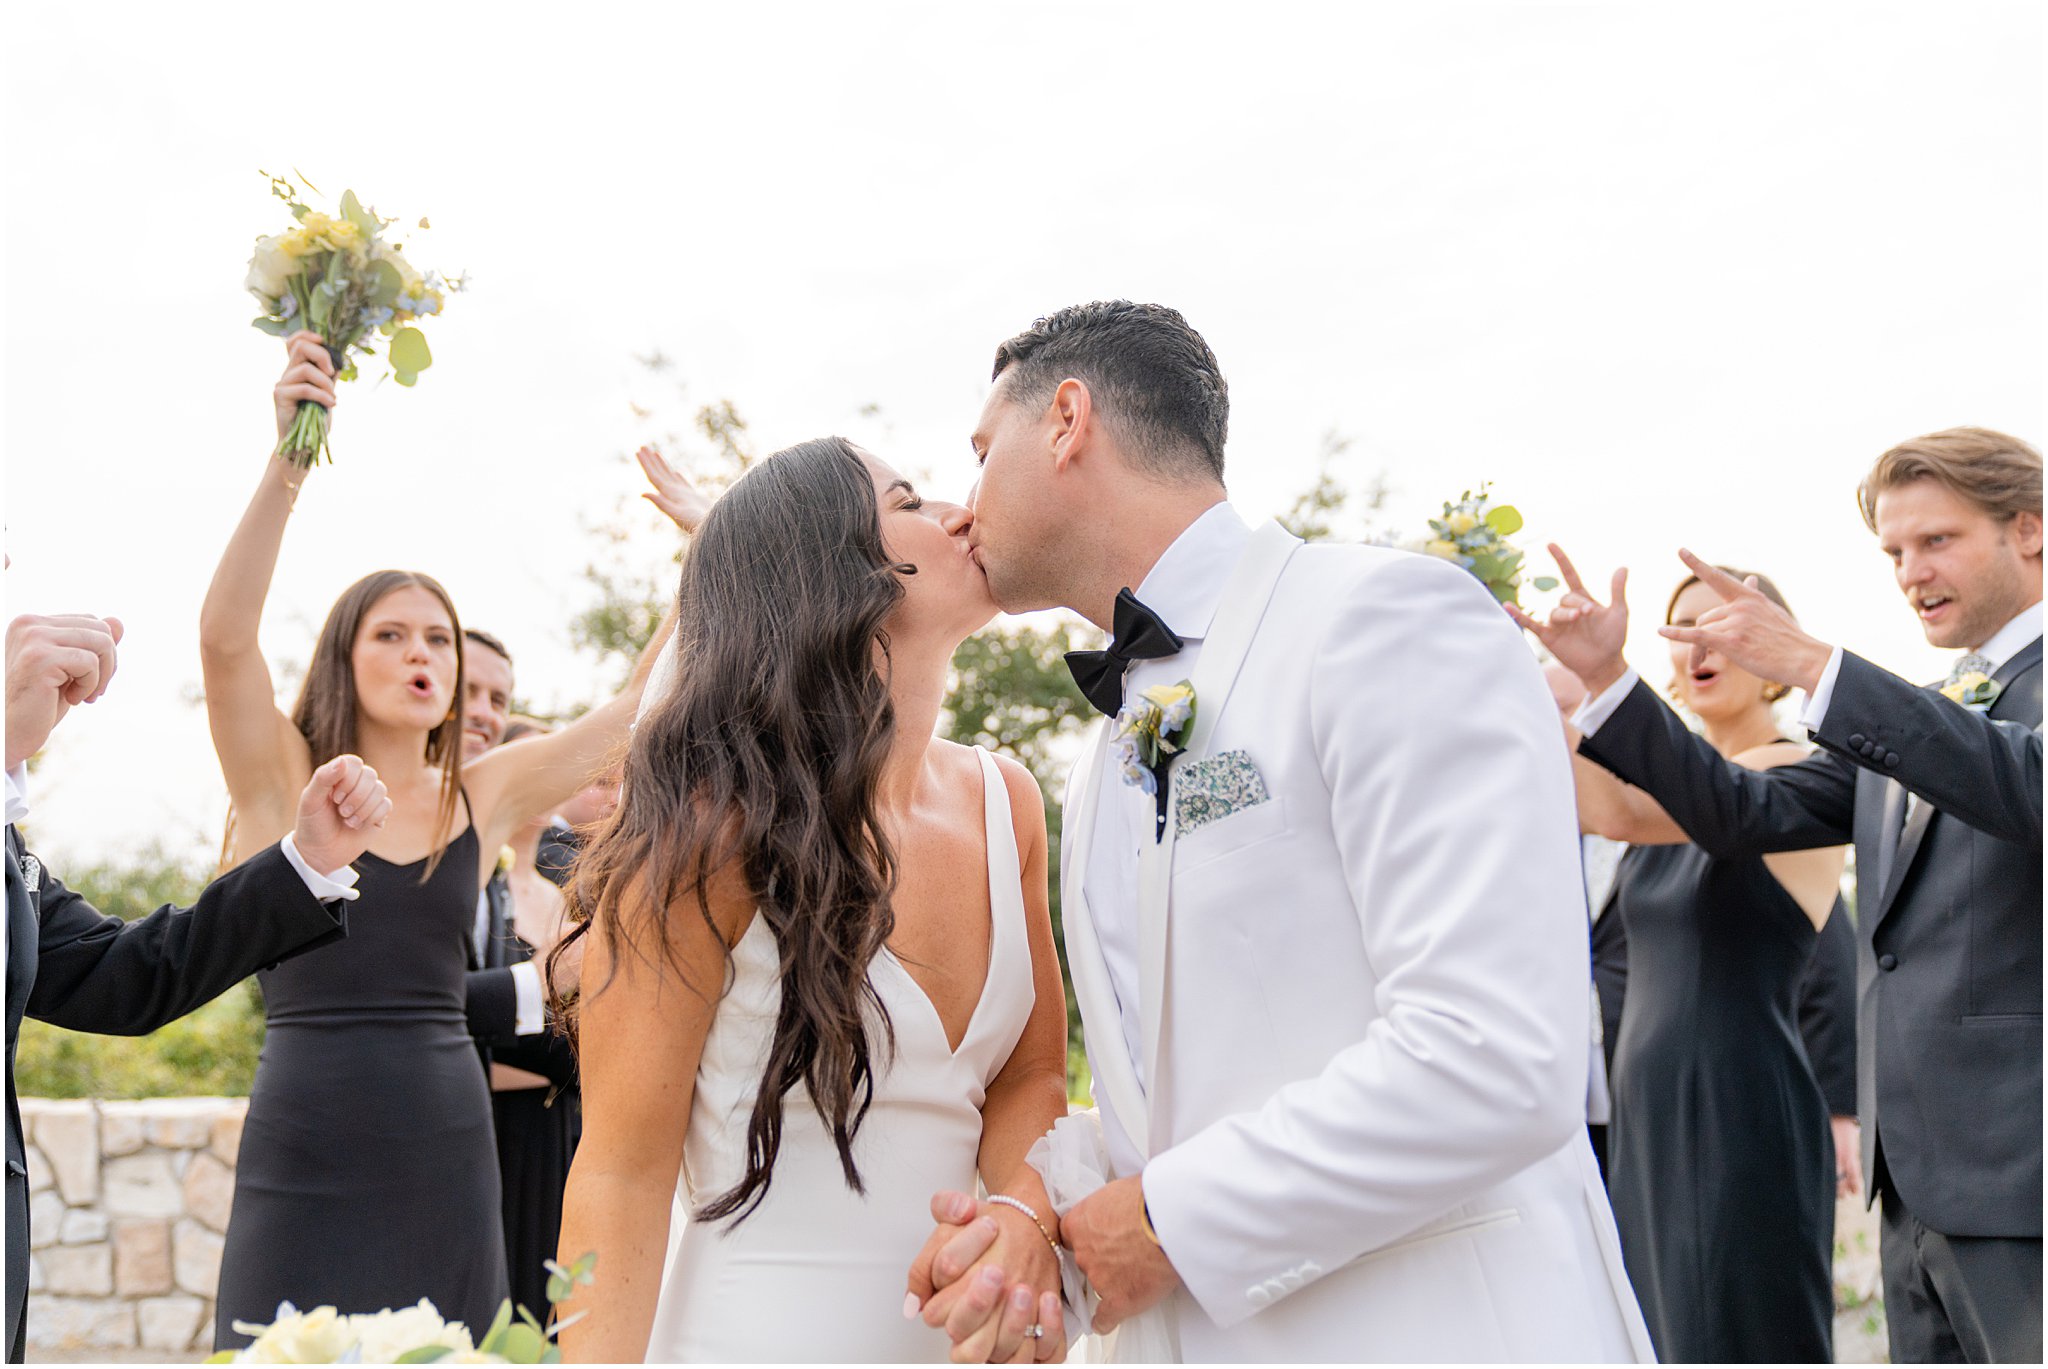 newlyweds kiss with wedding party cheering them on around them